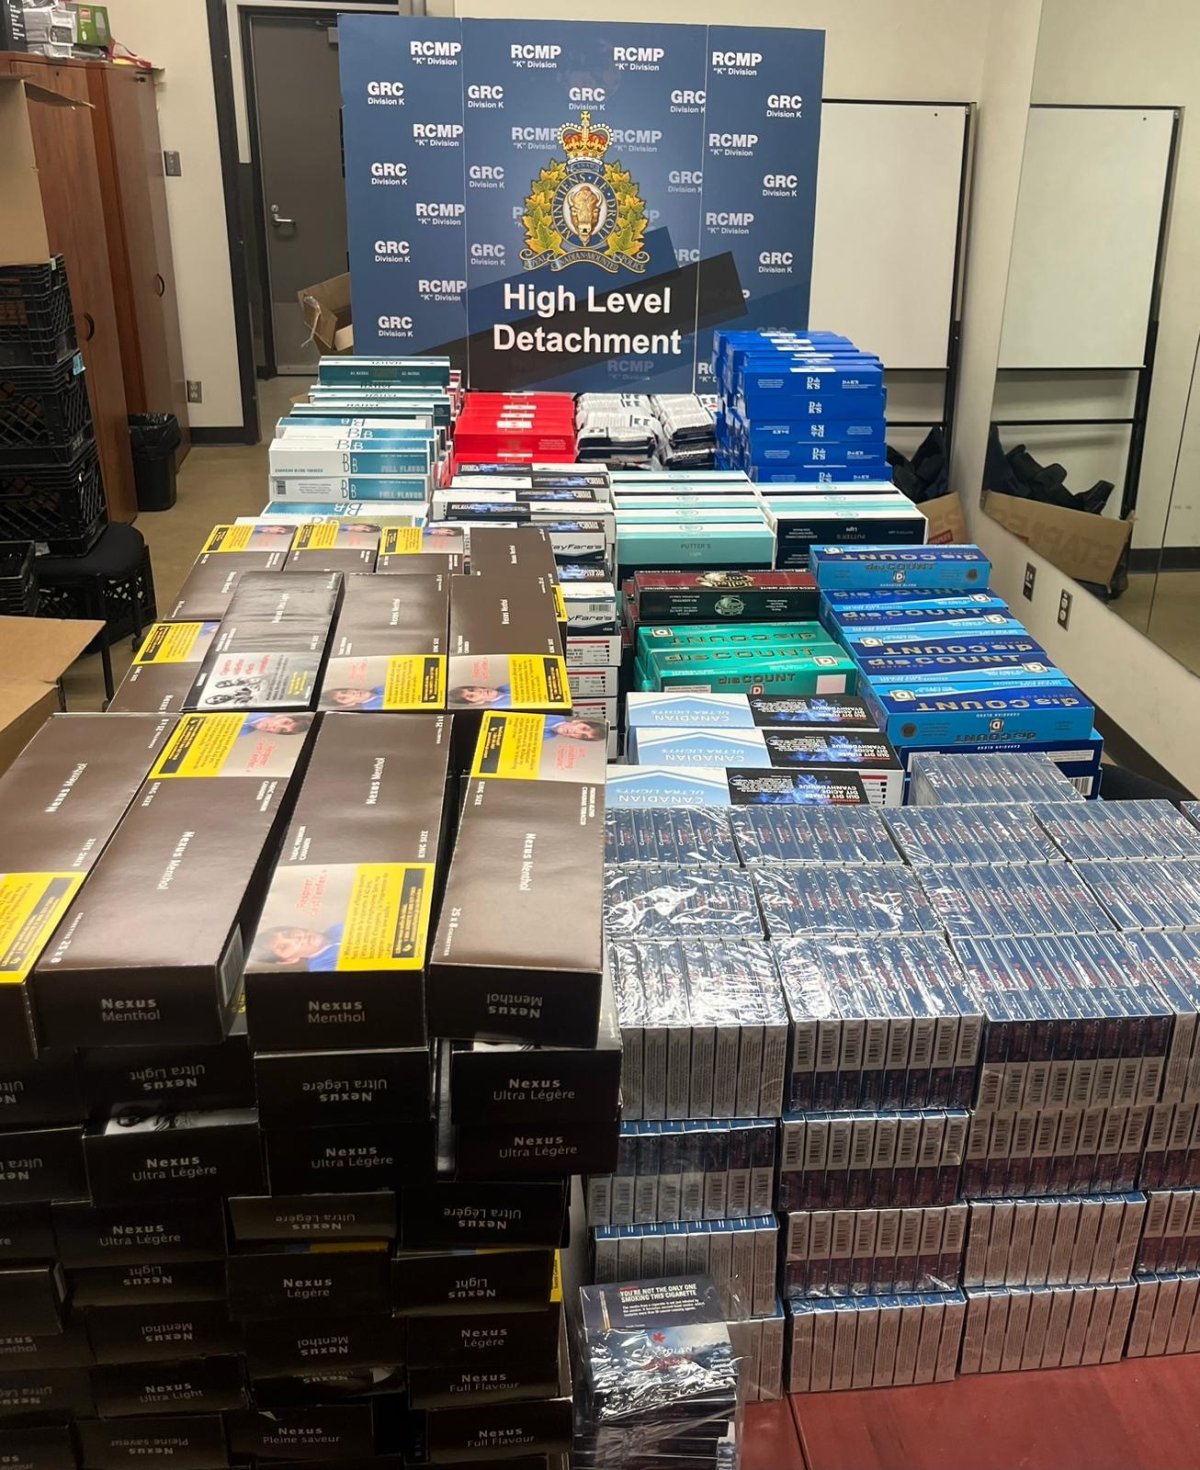 High Level RCMP have seized over 140,000 cigarettes during a search warrant of a business in Eleske, Alta. last month.